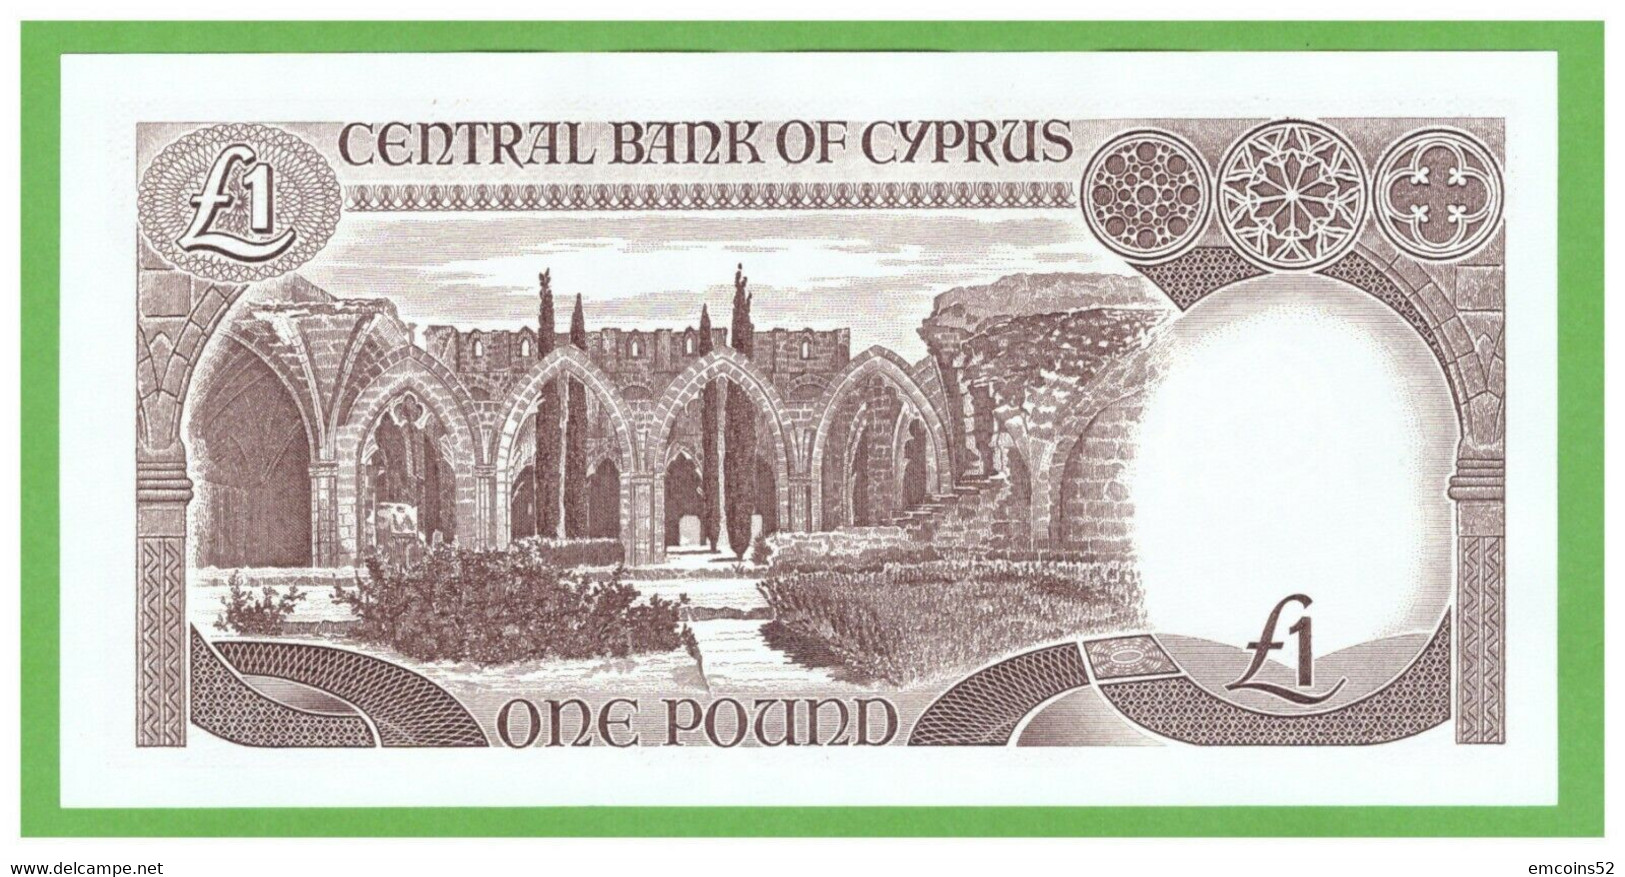 CYPRUS 1 POUND 1988  P-53a UNC  REPLACEMENT Z - Zypern